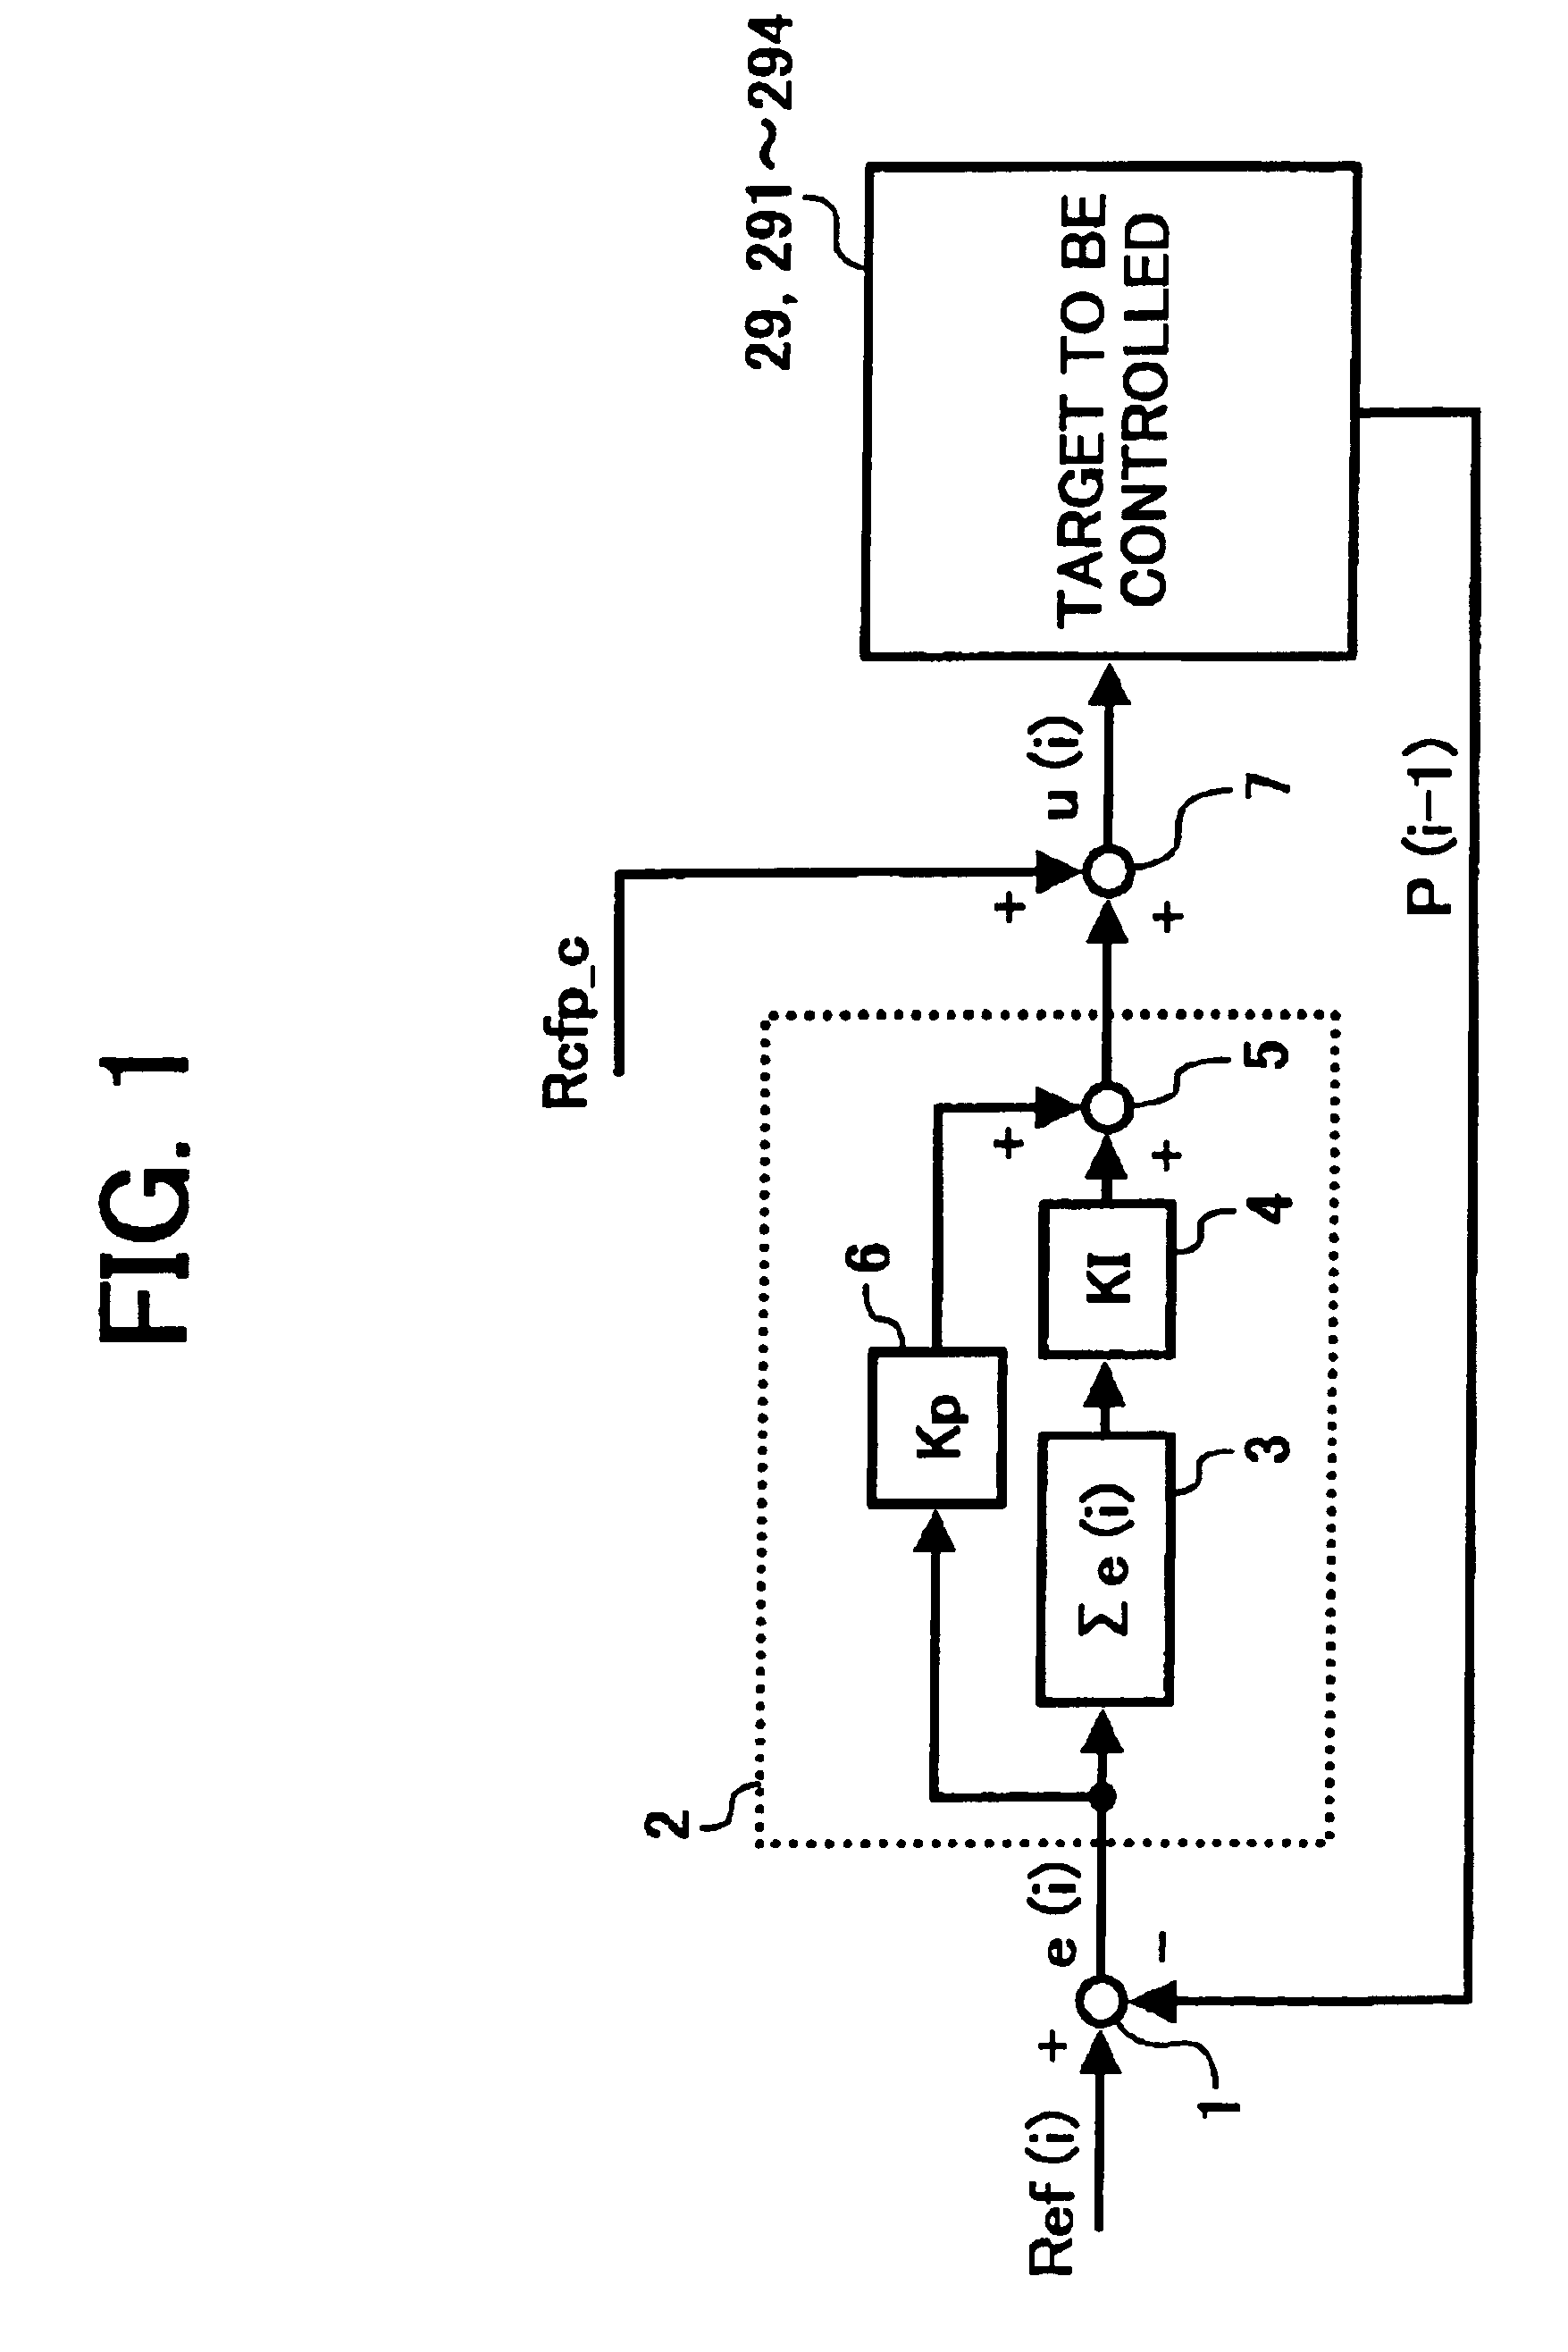 Apparatus for and method of driving motor to move object at a constant velocity